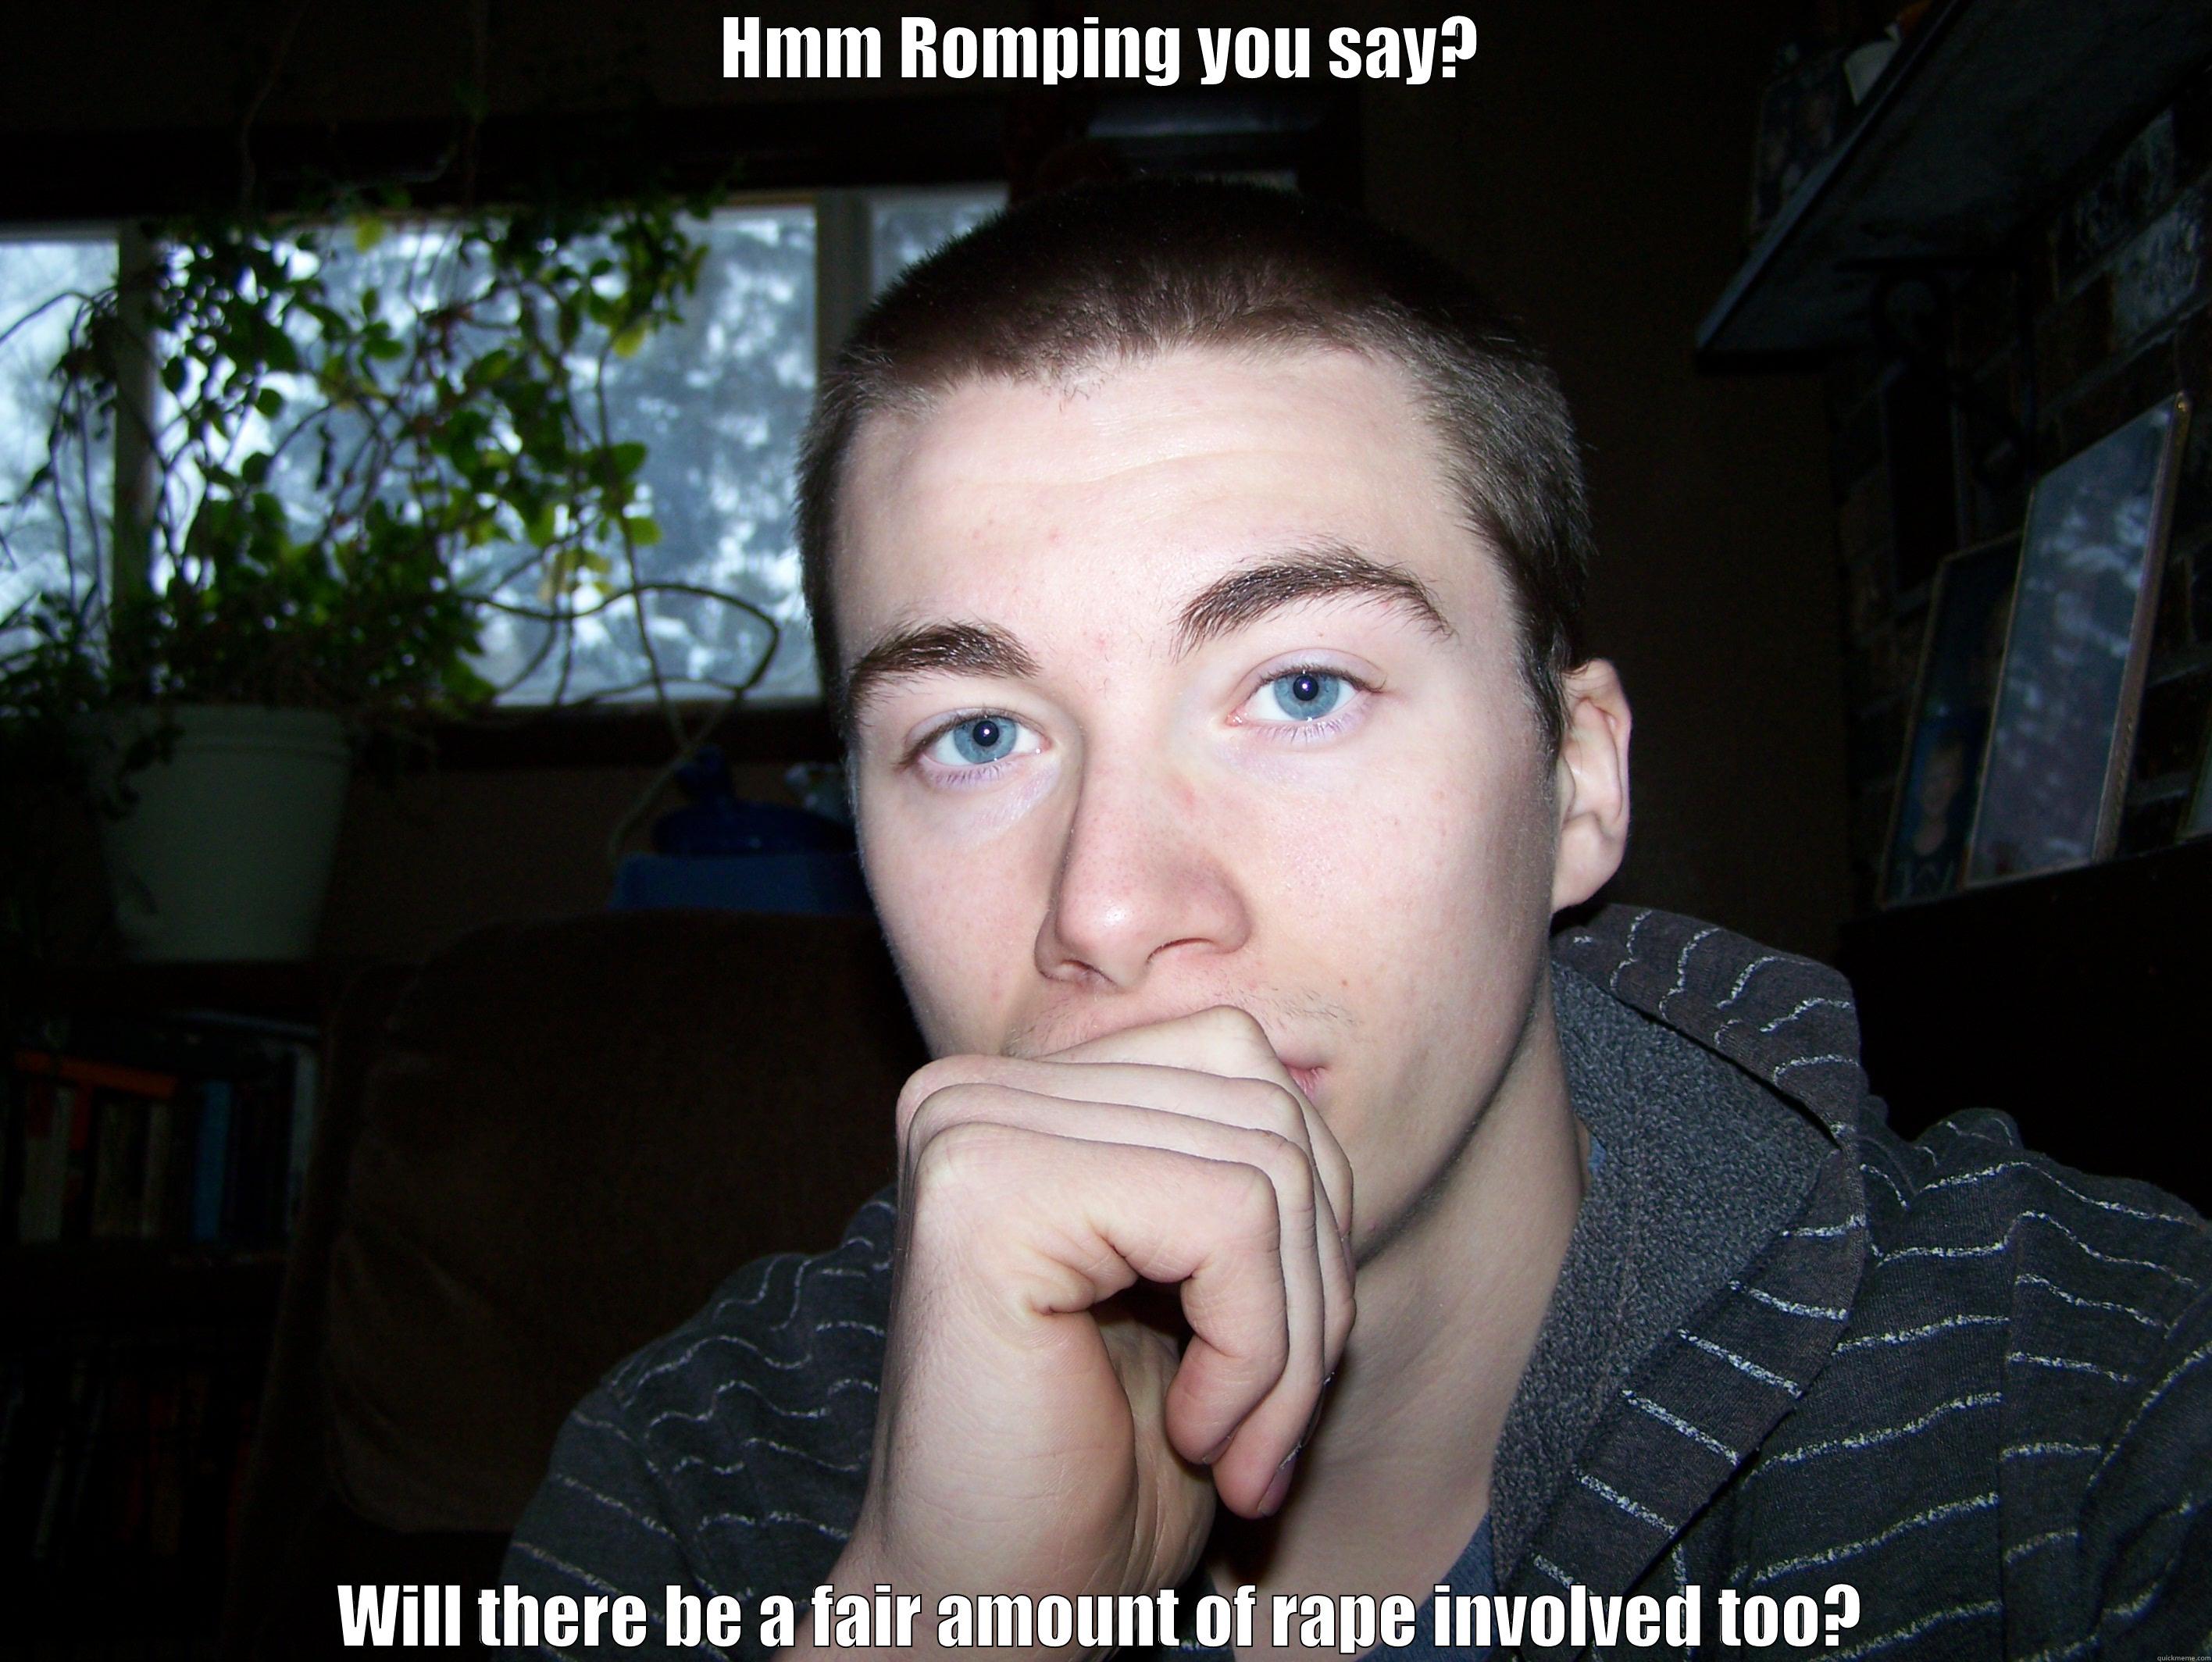 HMM ROMPING YOU SAY? WILL THERE BE A FAIR AMOUNT OF RAPE INVOLVED TOO? Misc